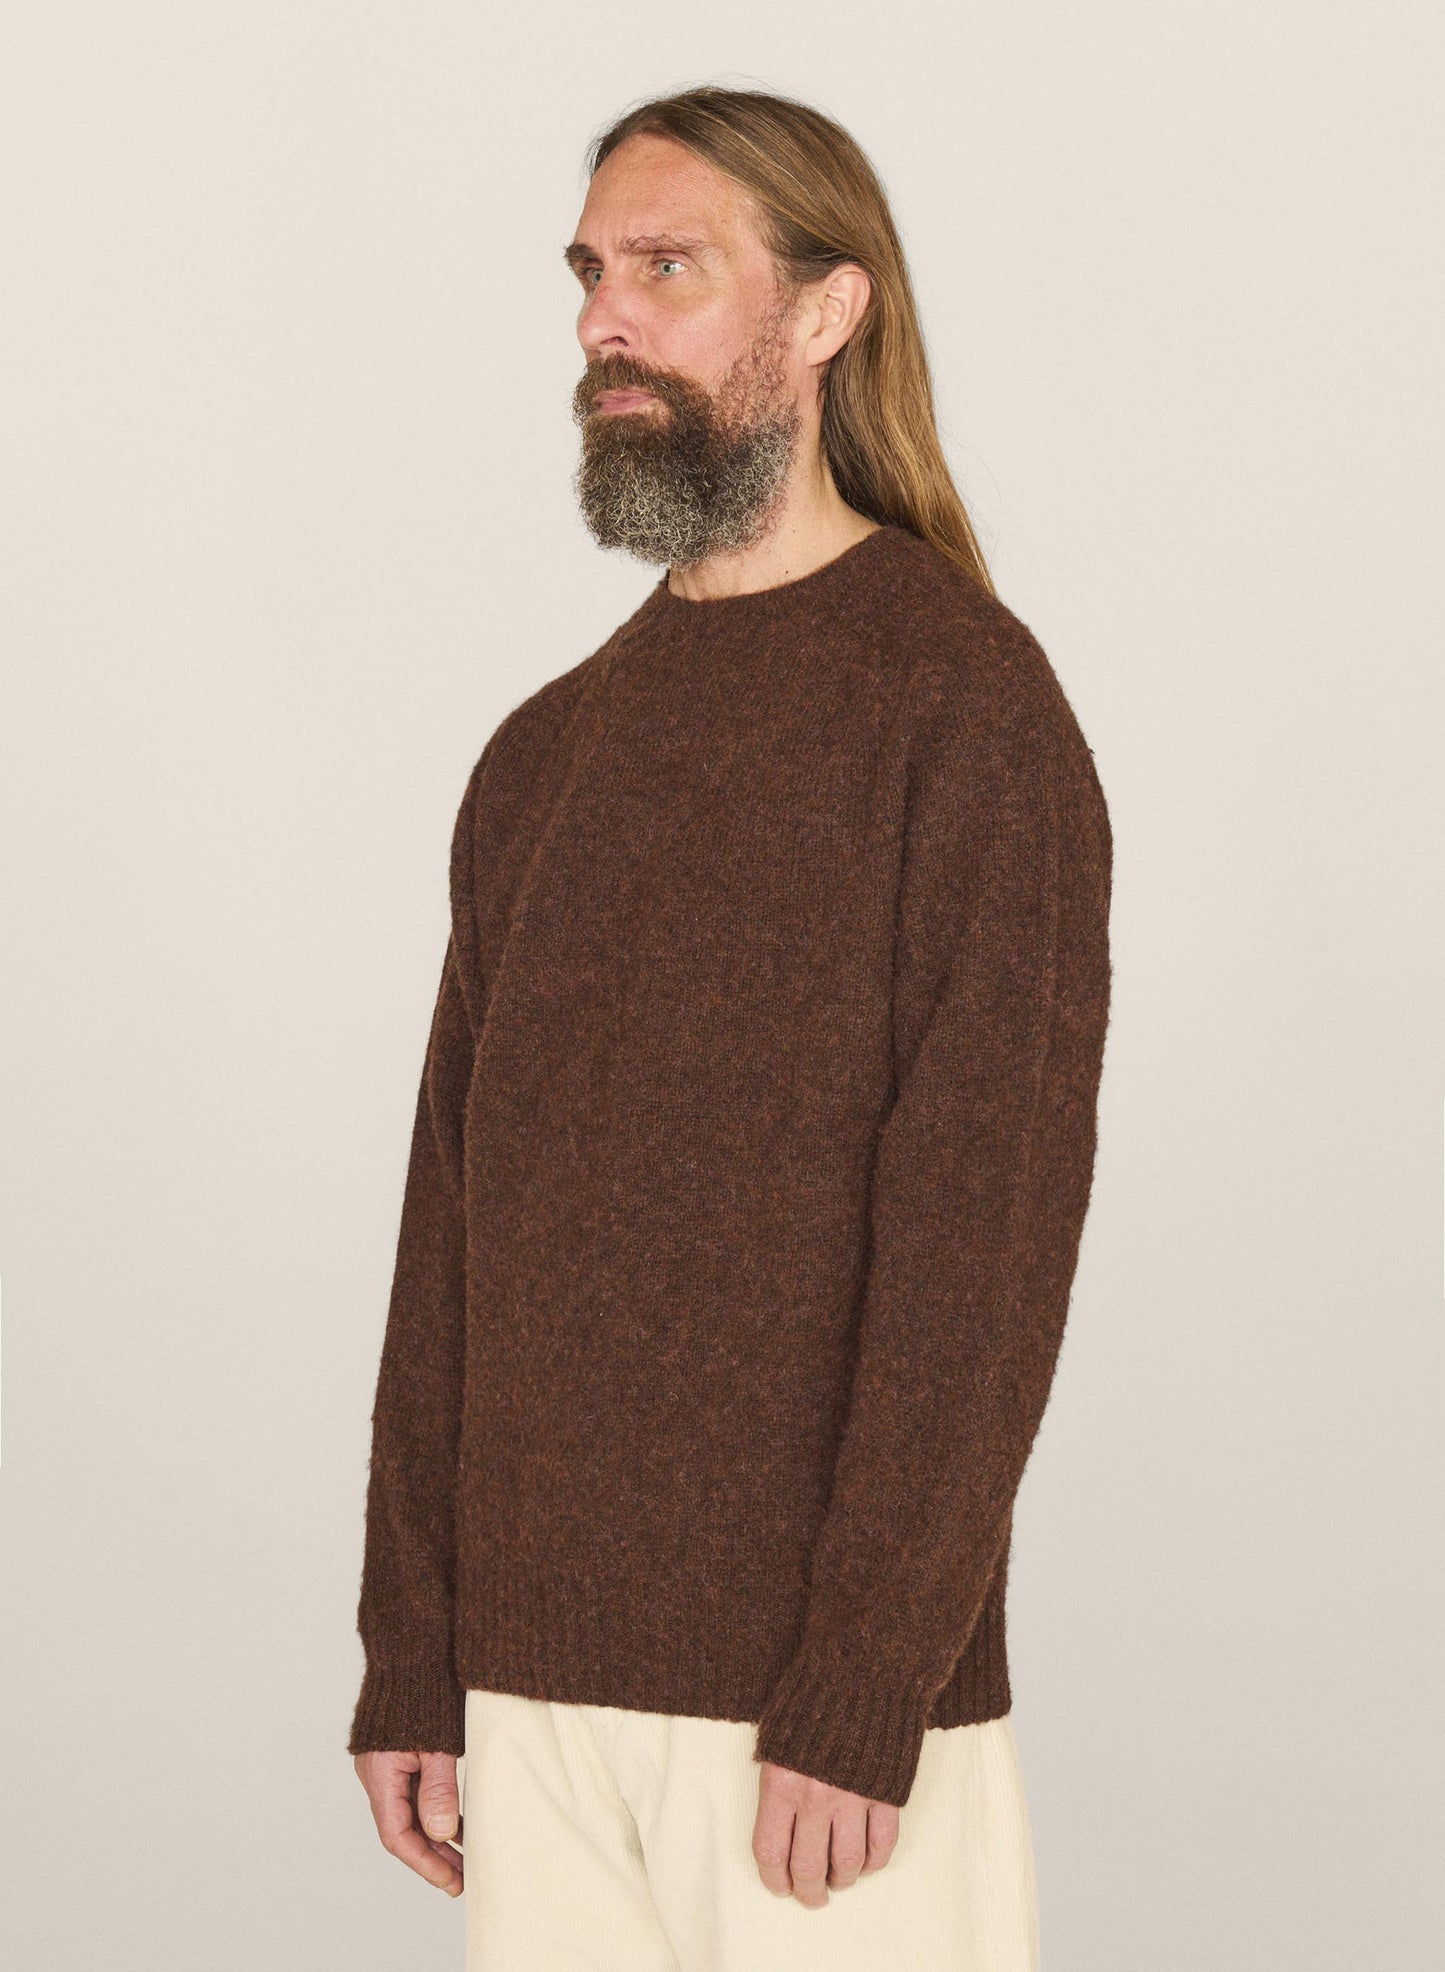 Suedehead Crew Neck Sweater Brown